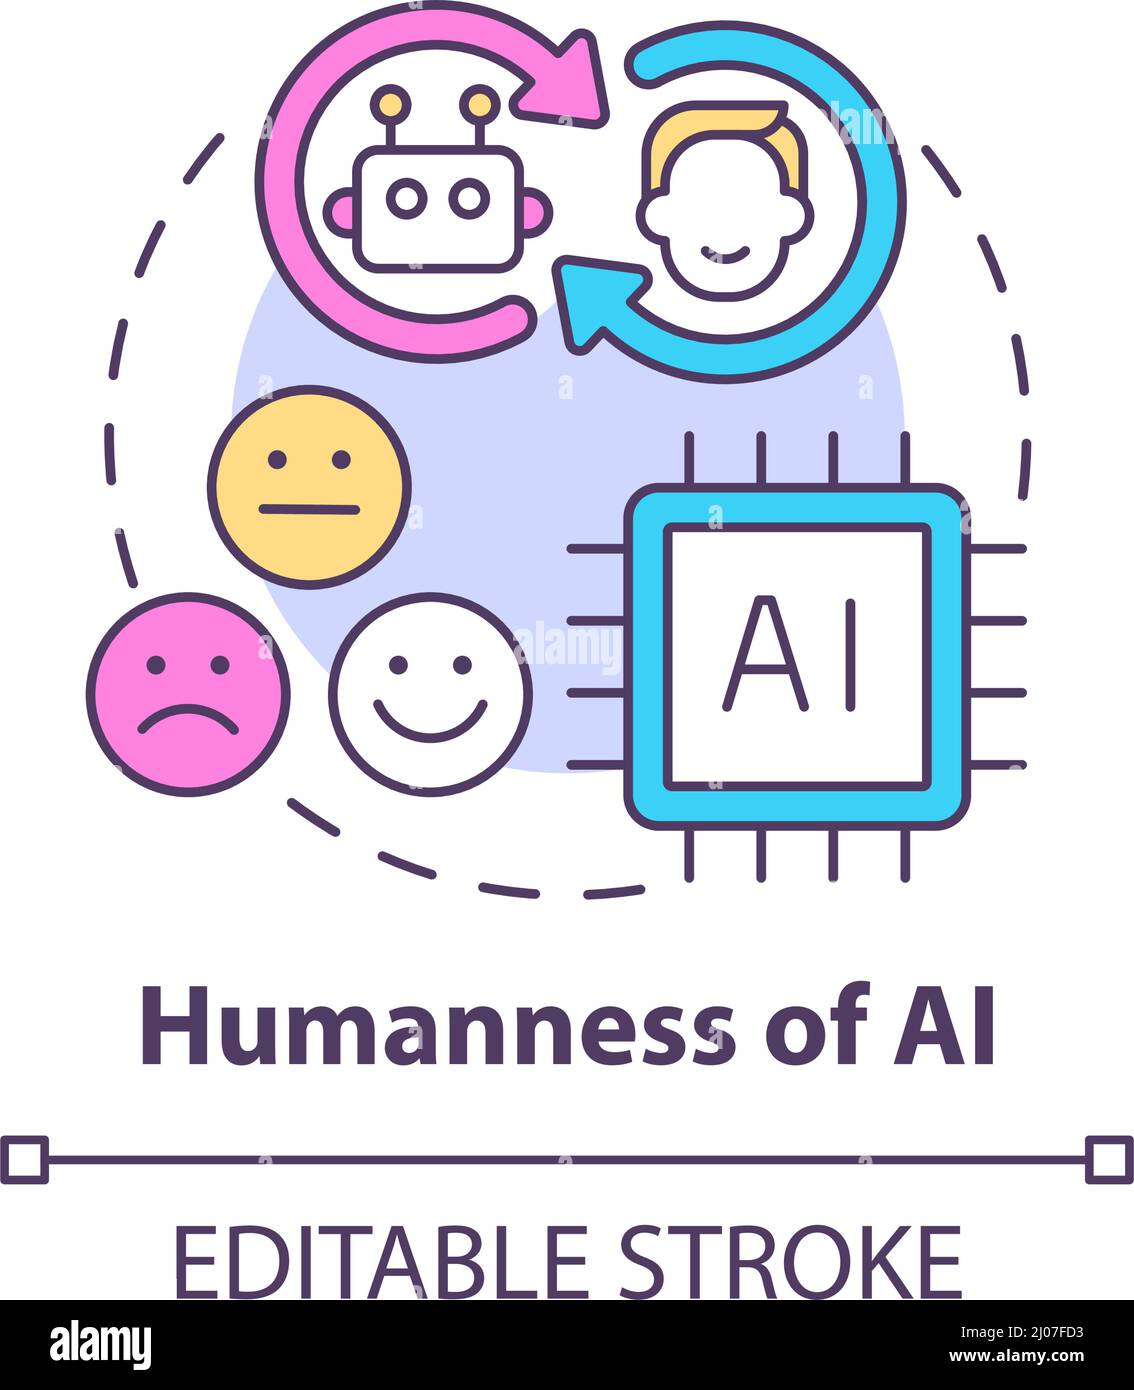 Humanness of AI concept icon Stock Vector